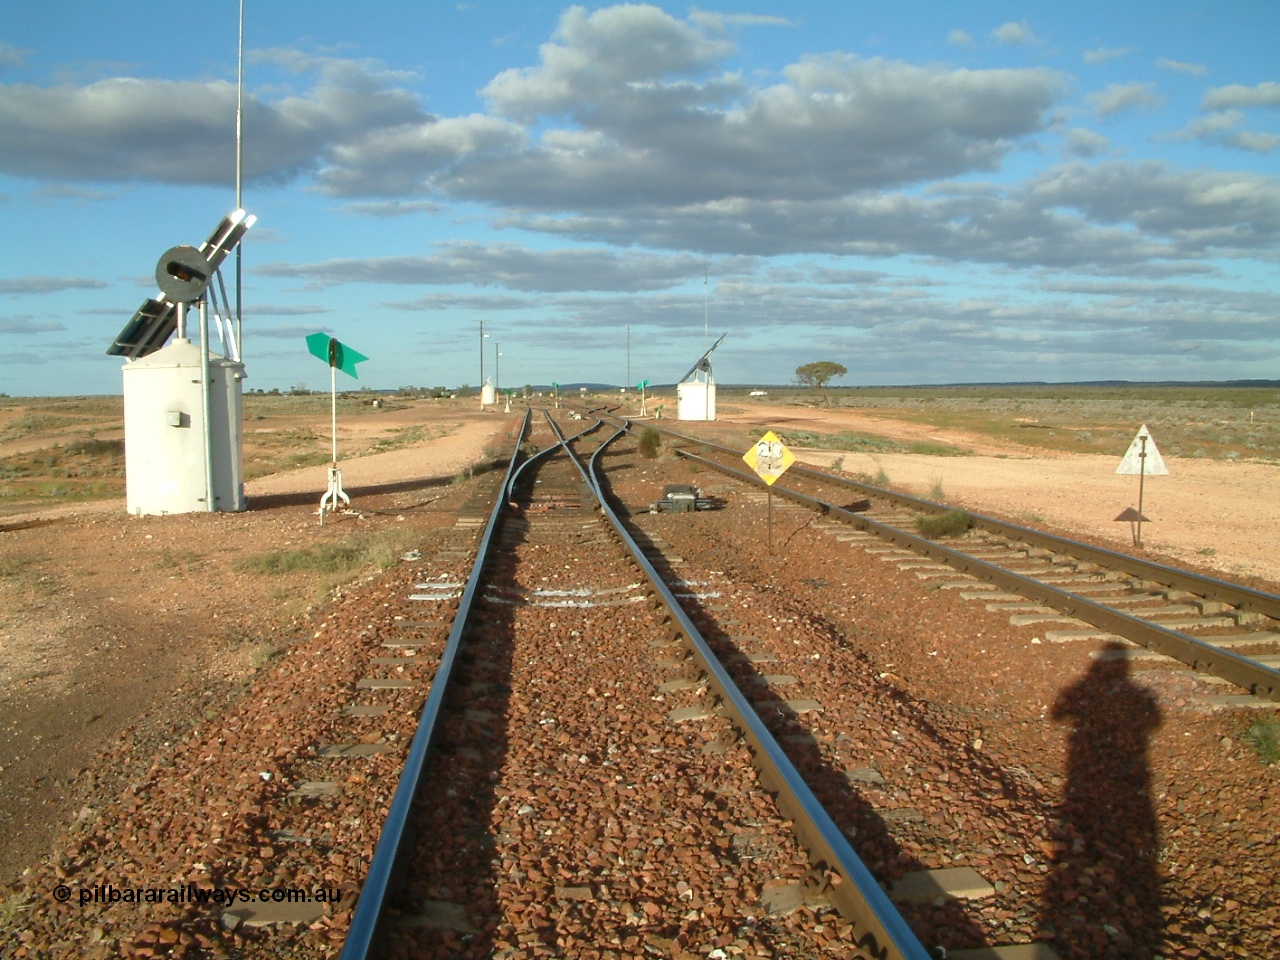 030415 171358
Tarcoola, at the 504.5 km, looking east along the Central Australia line at the western end of the loop and Trans Australian is the right road. Tarcoola is the junction for the TAR and CAR railways situated 504 km from the 0 km datum at Coonamia. 15th April 2003.
